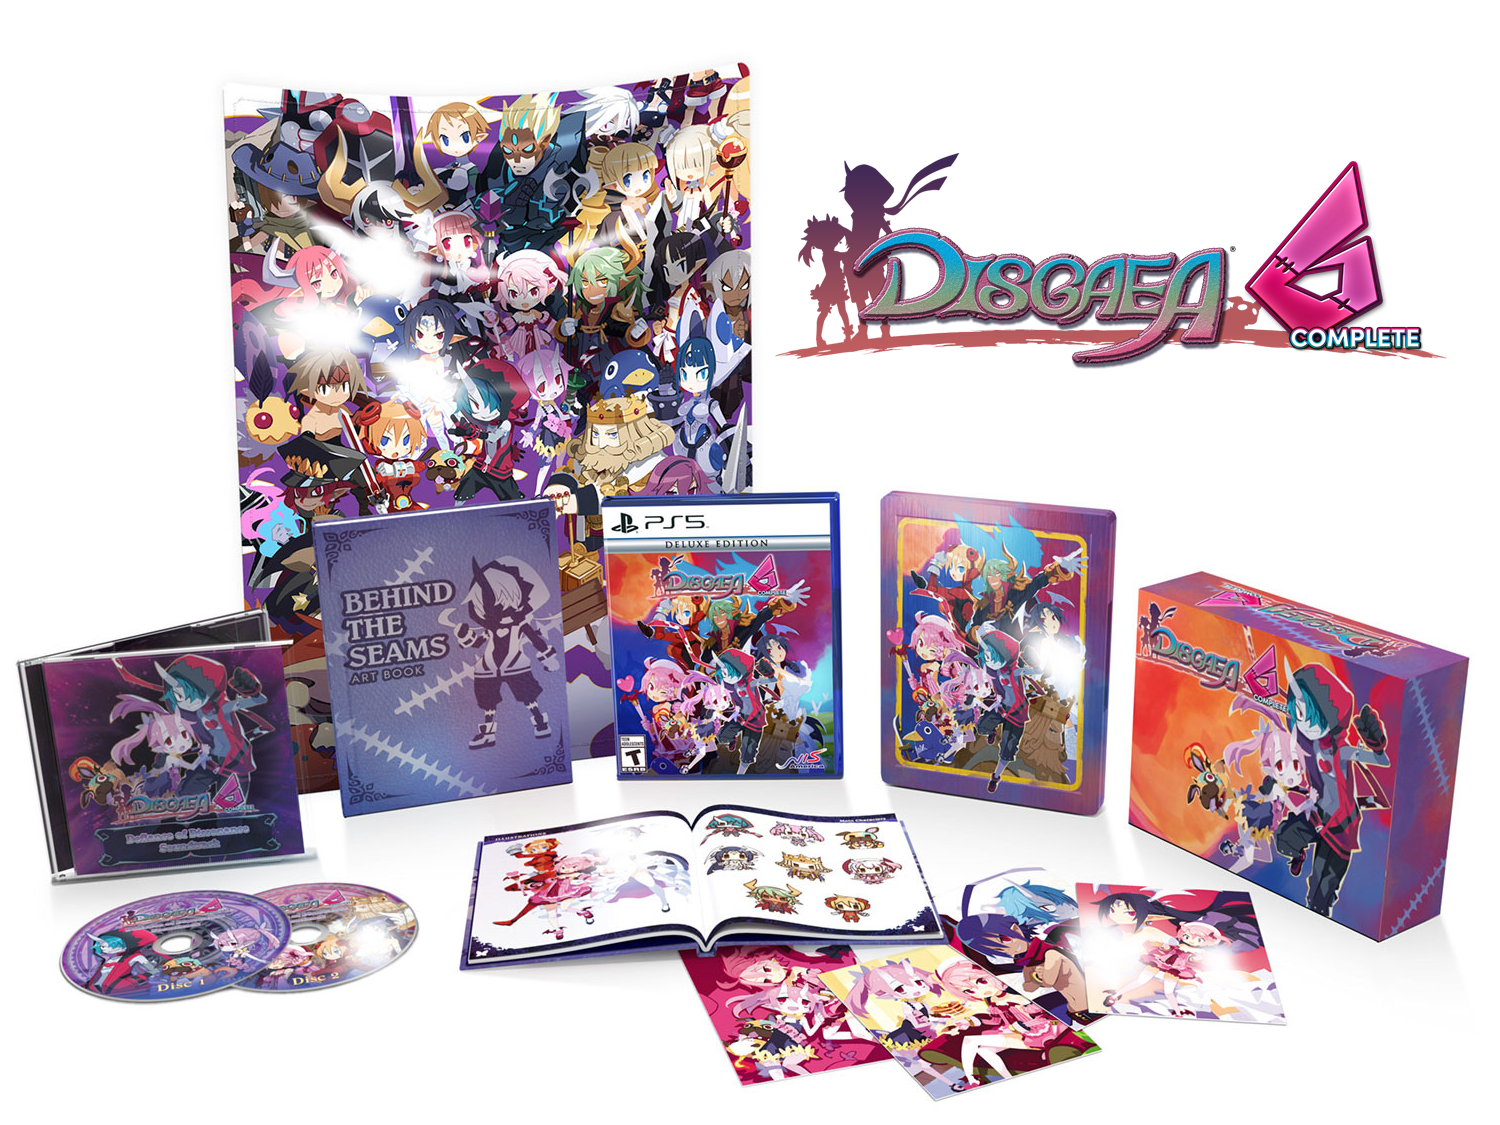 DISGAEA 6 COMPLETE IS HERE, DOOD, AND WE'RE YOUR ONE-STOP SHOP FOR YOUR NETHERWORLD NEEDS!